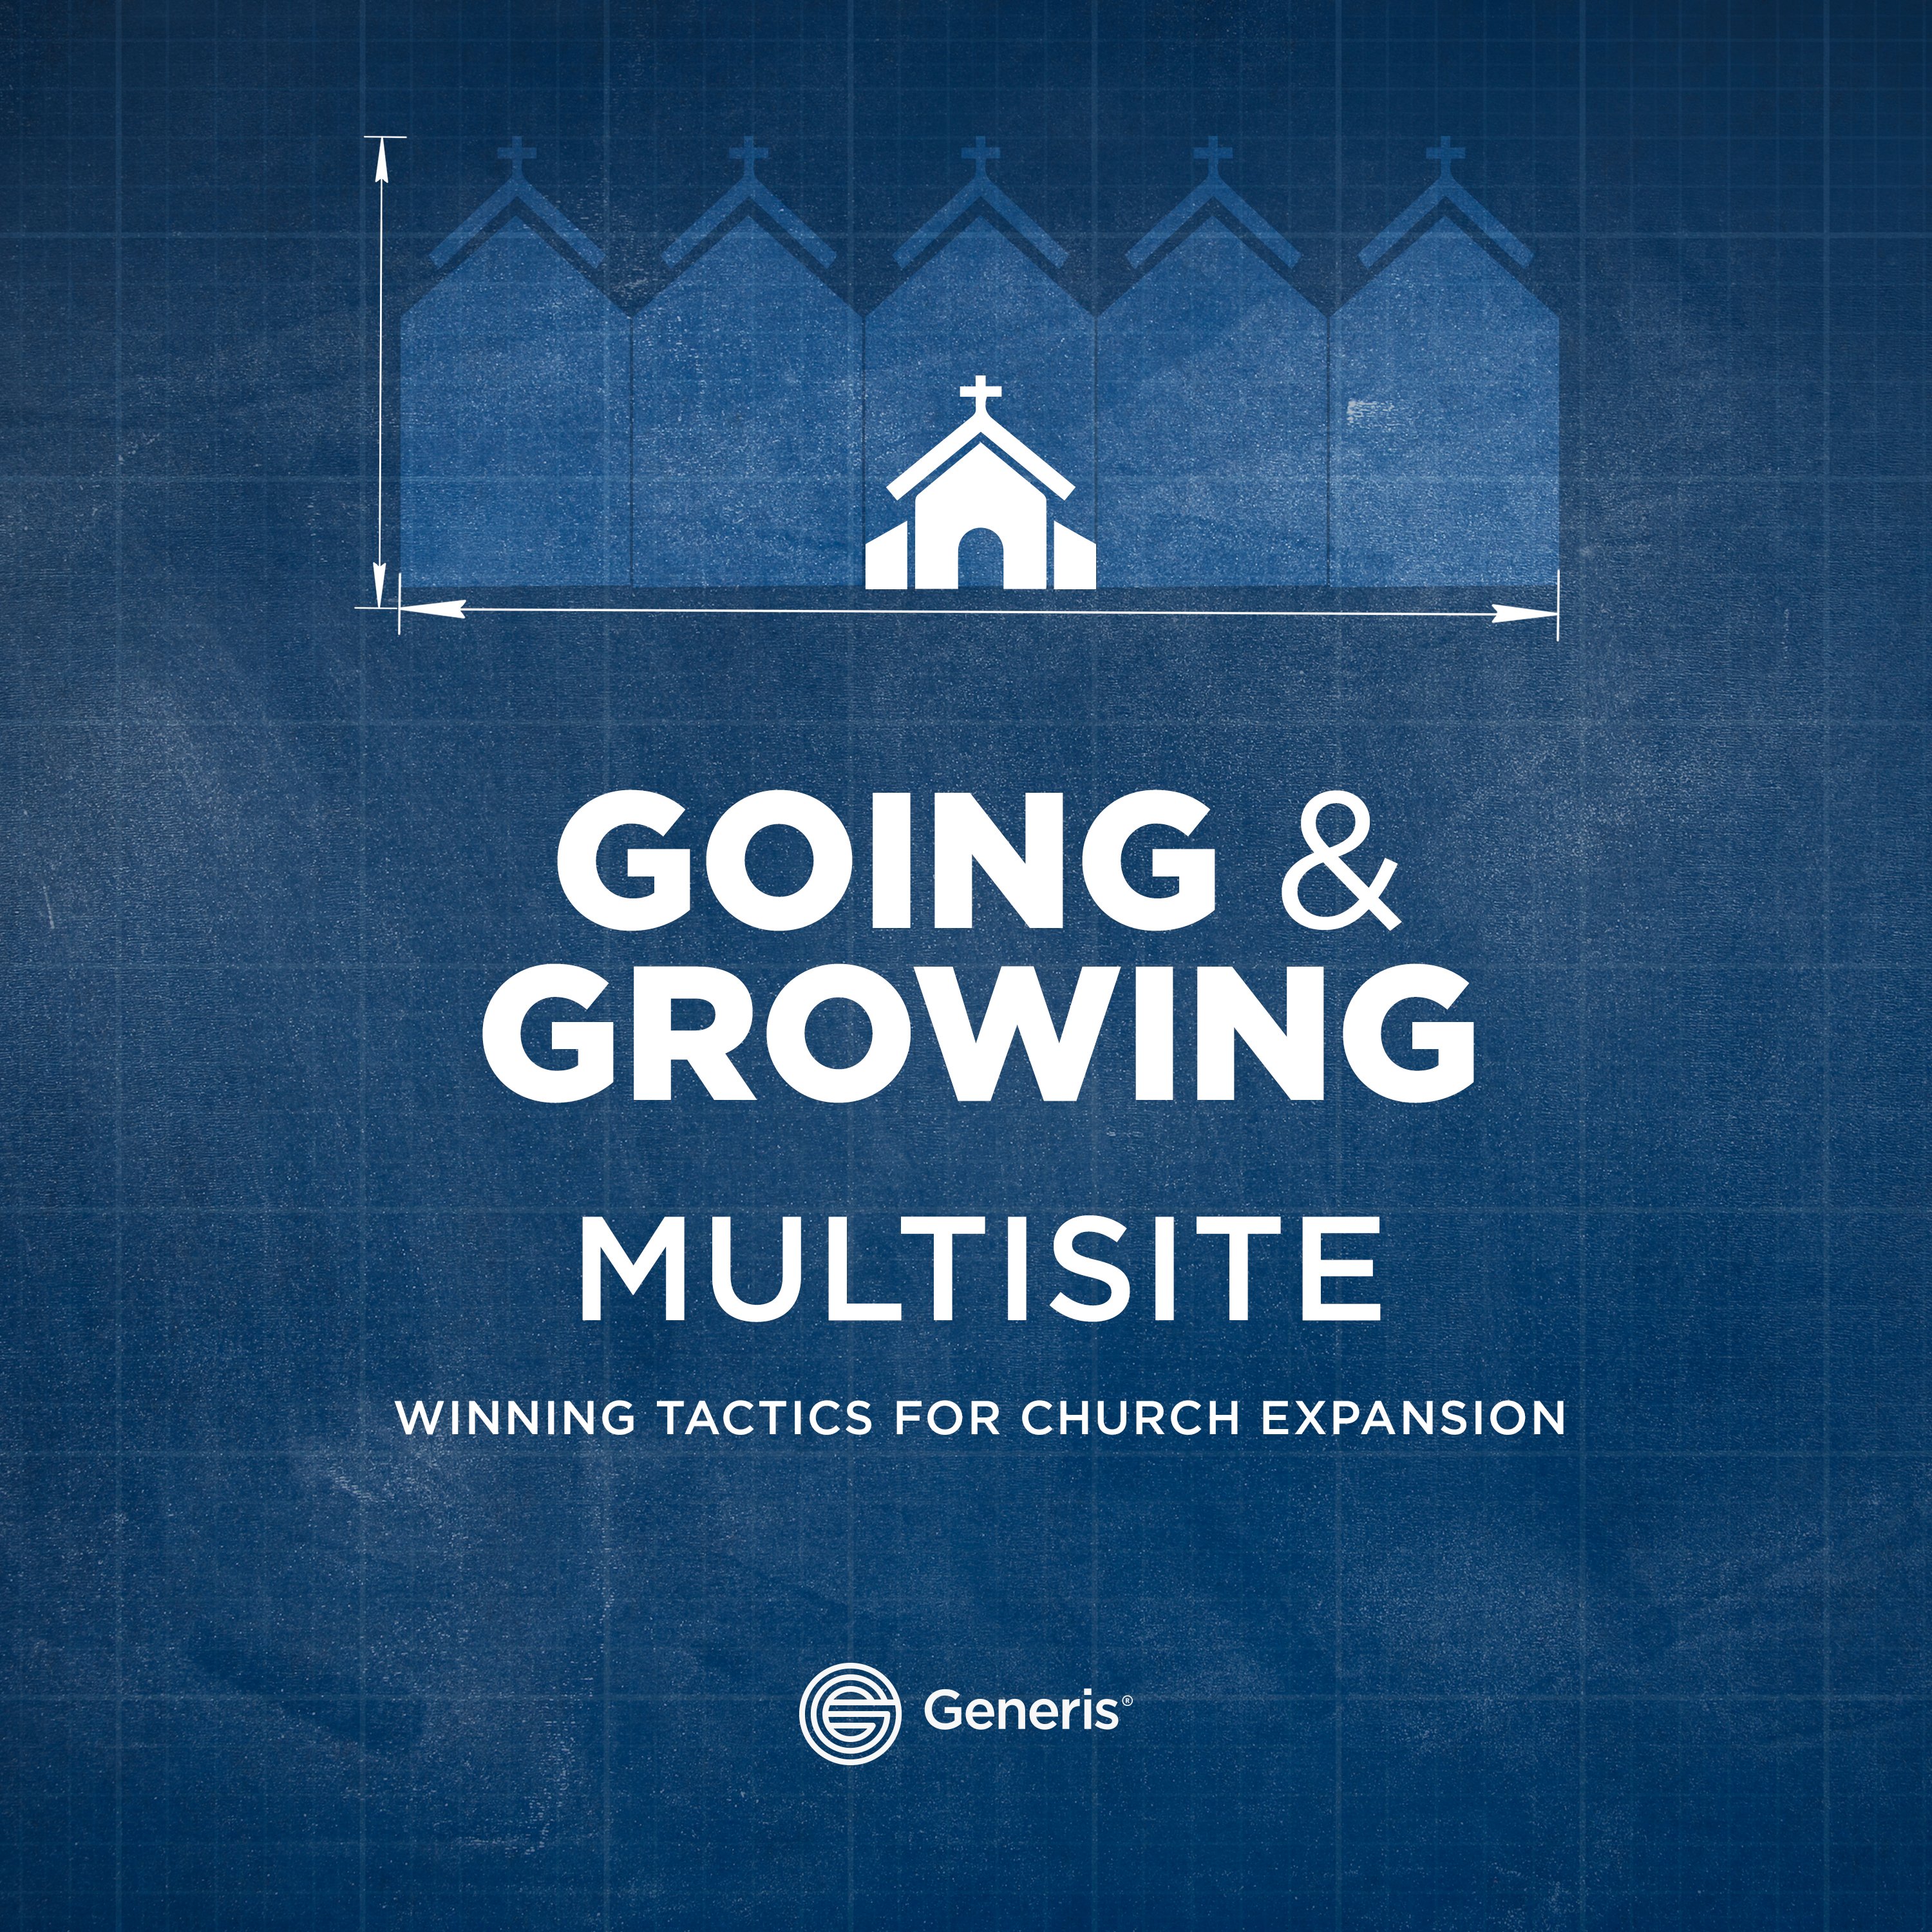 Going & Growing Multisite